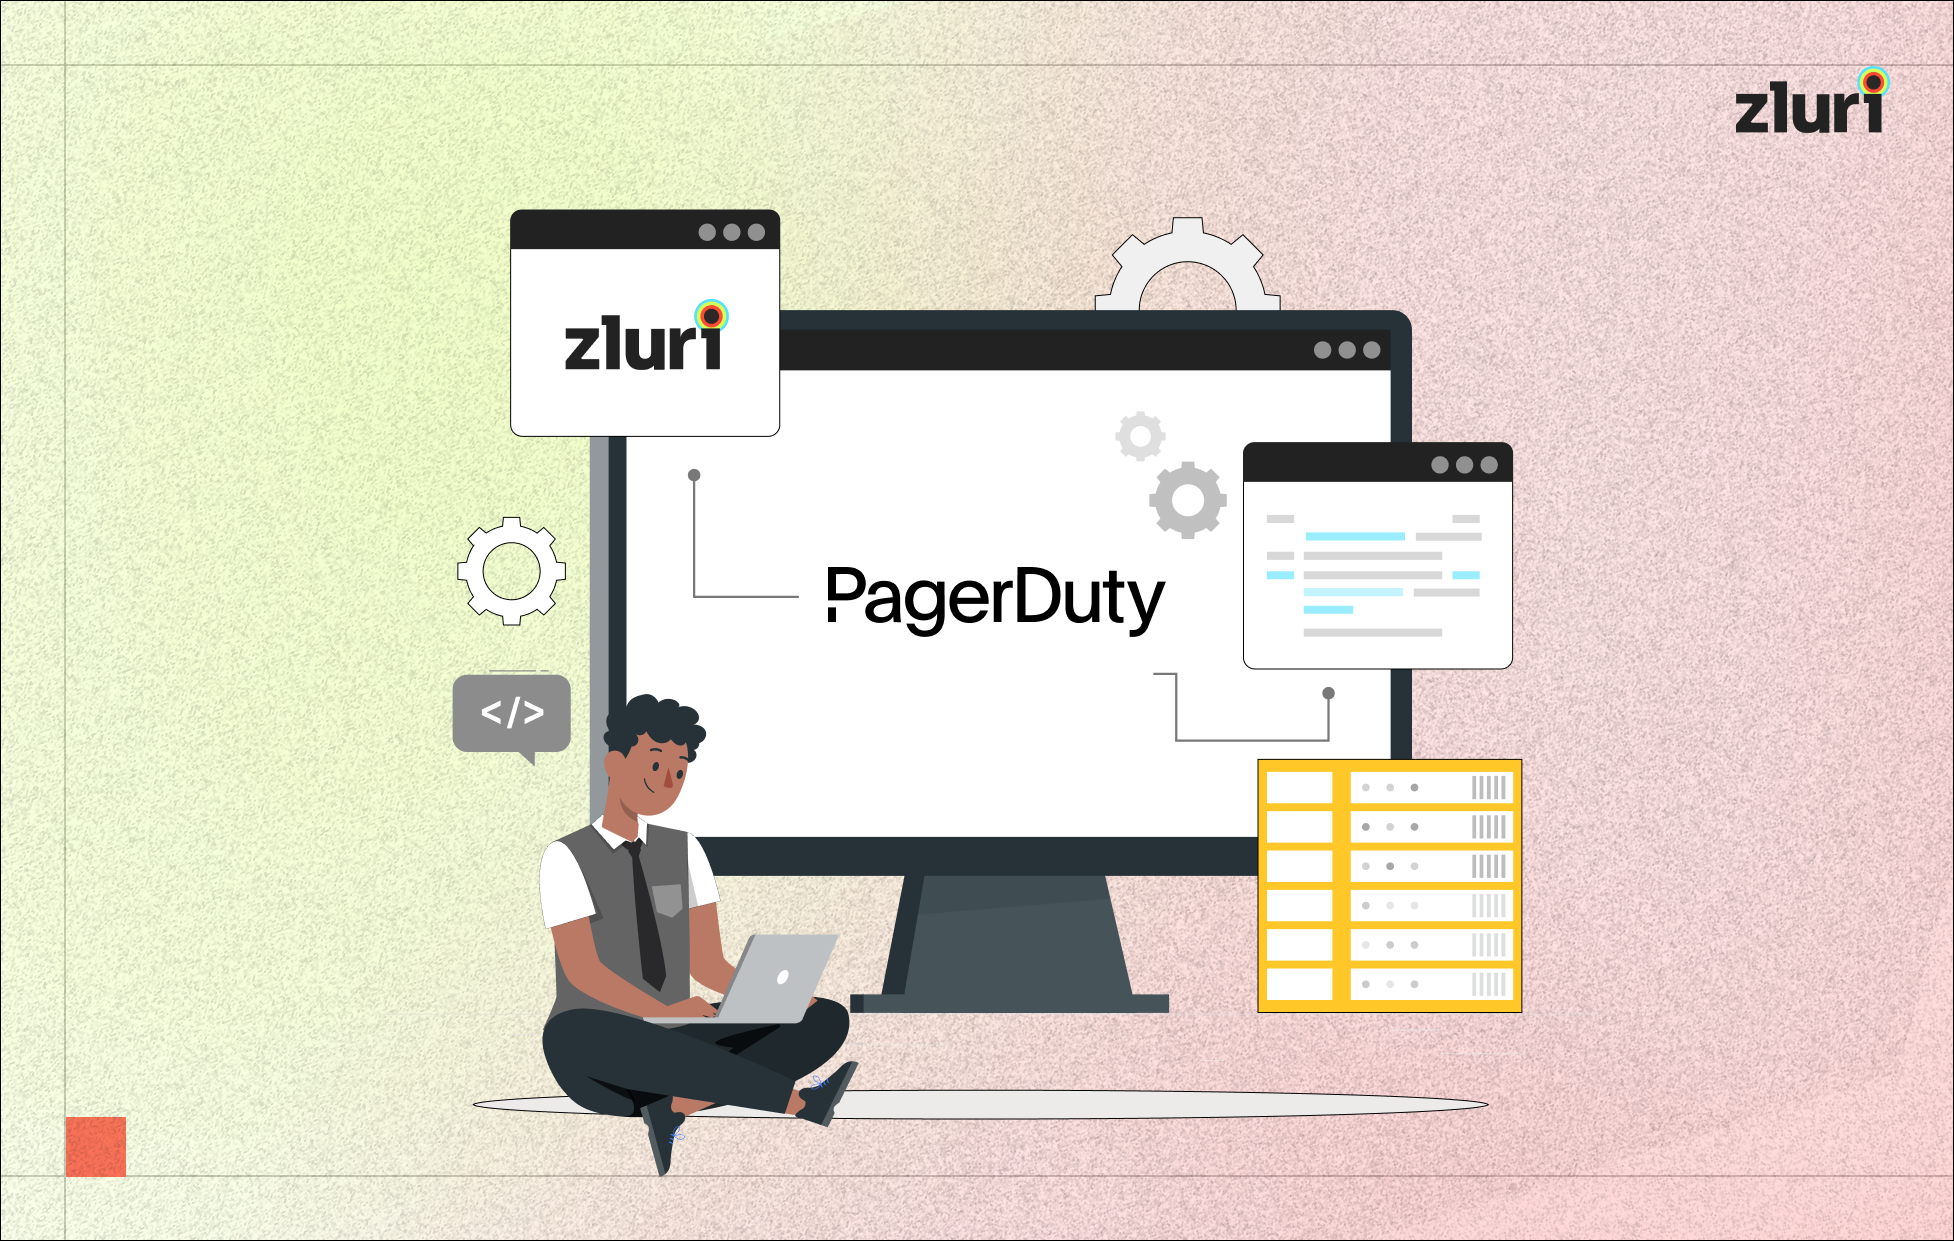 How To Get More Out Of PagerDuty By Integrating With Zluri? - Featured Shot